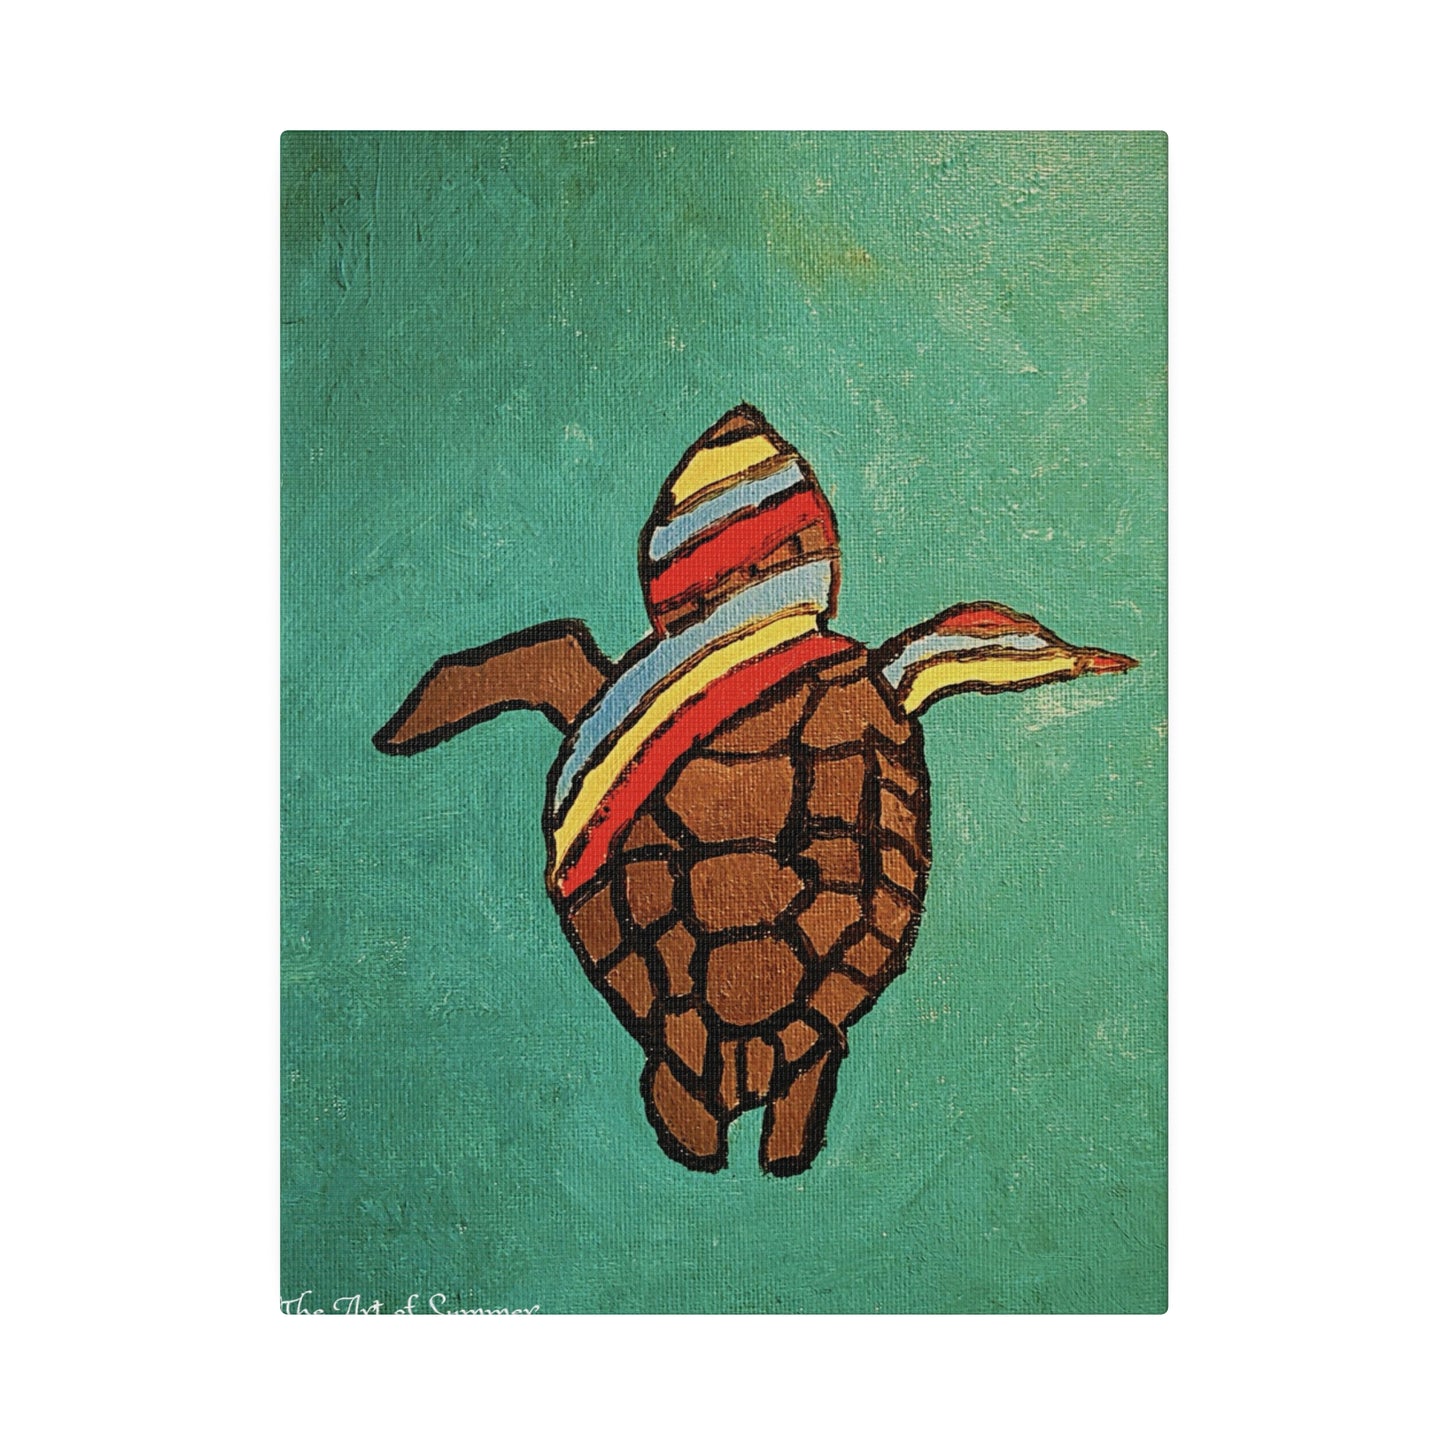 Summer Sea Turtle Canvas Art - ART OF SUMMER - Unique canvas print. Whimsical Colored Sea Turtle | Not Sold In Stores